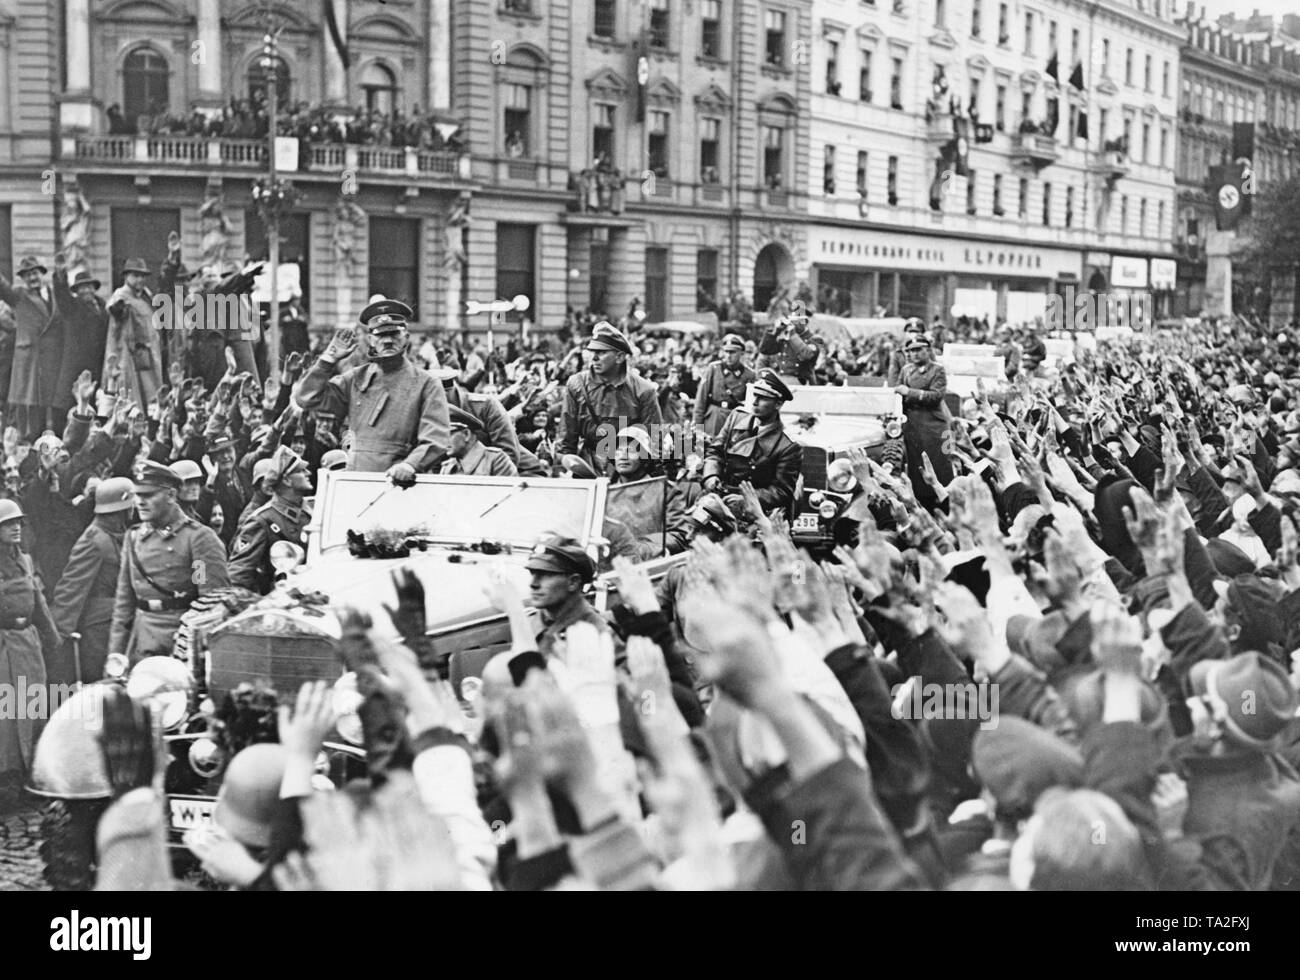 Adolf Hitler entering Karlsbad (today Karlovy Vary) on October 4, 1938. His motorcade is received cheerfully by the population. They are greeting him the Nazi salute. In his car in the back on the right, Adjutant of the Luftwaffe Nicolaus von Below. Sitting in front of him, General Walter von Reichenau. The bodyguards of the SS follow with other cars. Stock Photo